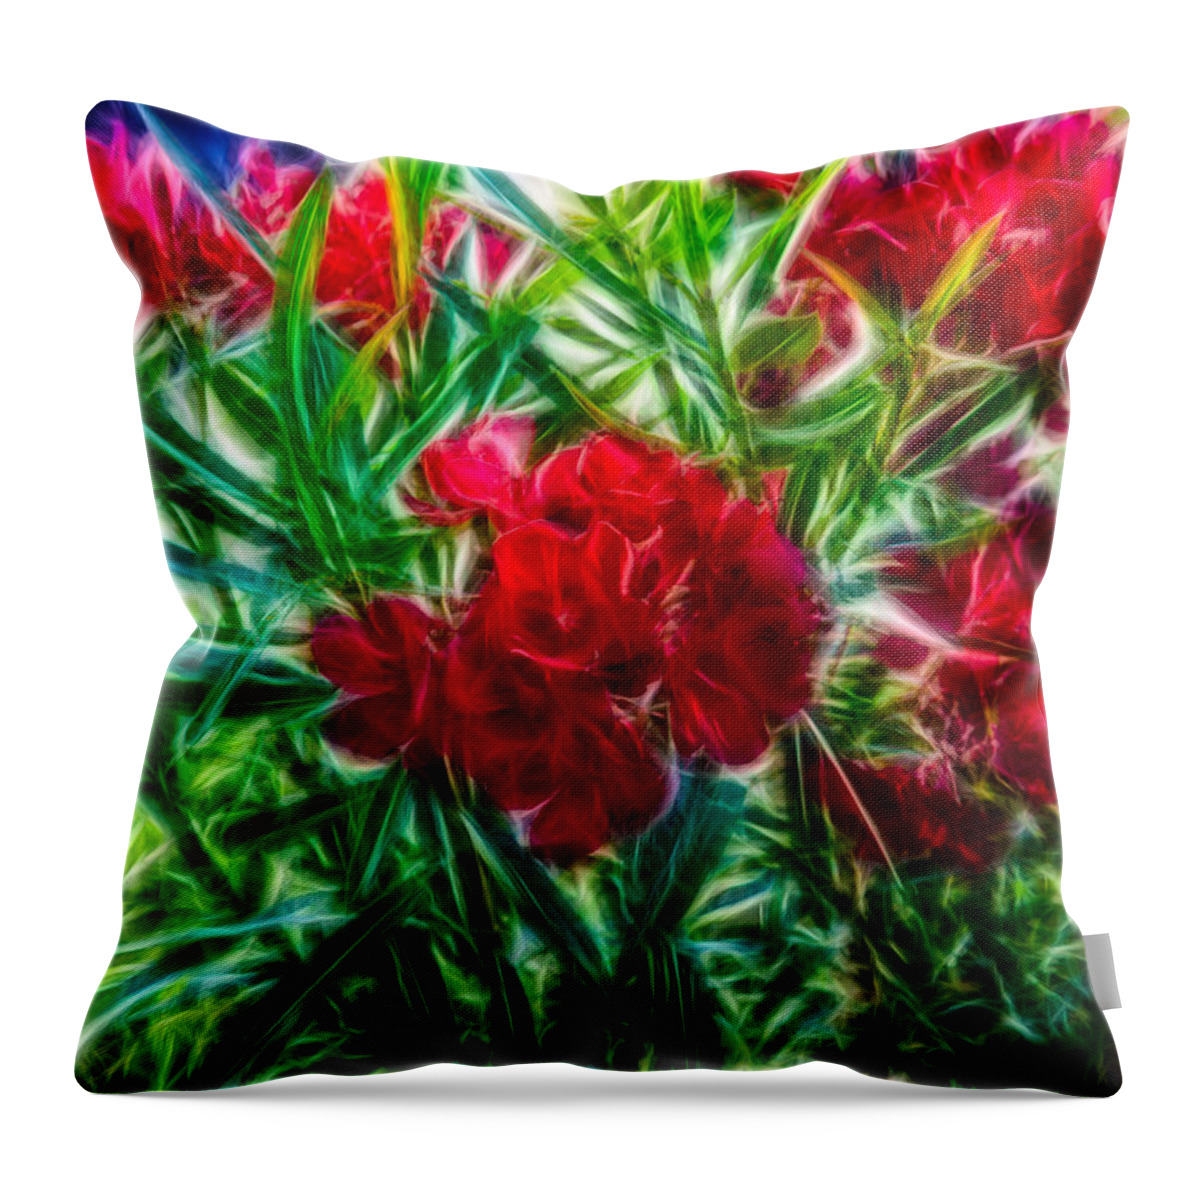  Spikes And Colors Throw Pillow featuring the painting Spikes and Colors by Omaste Witkowski